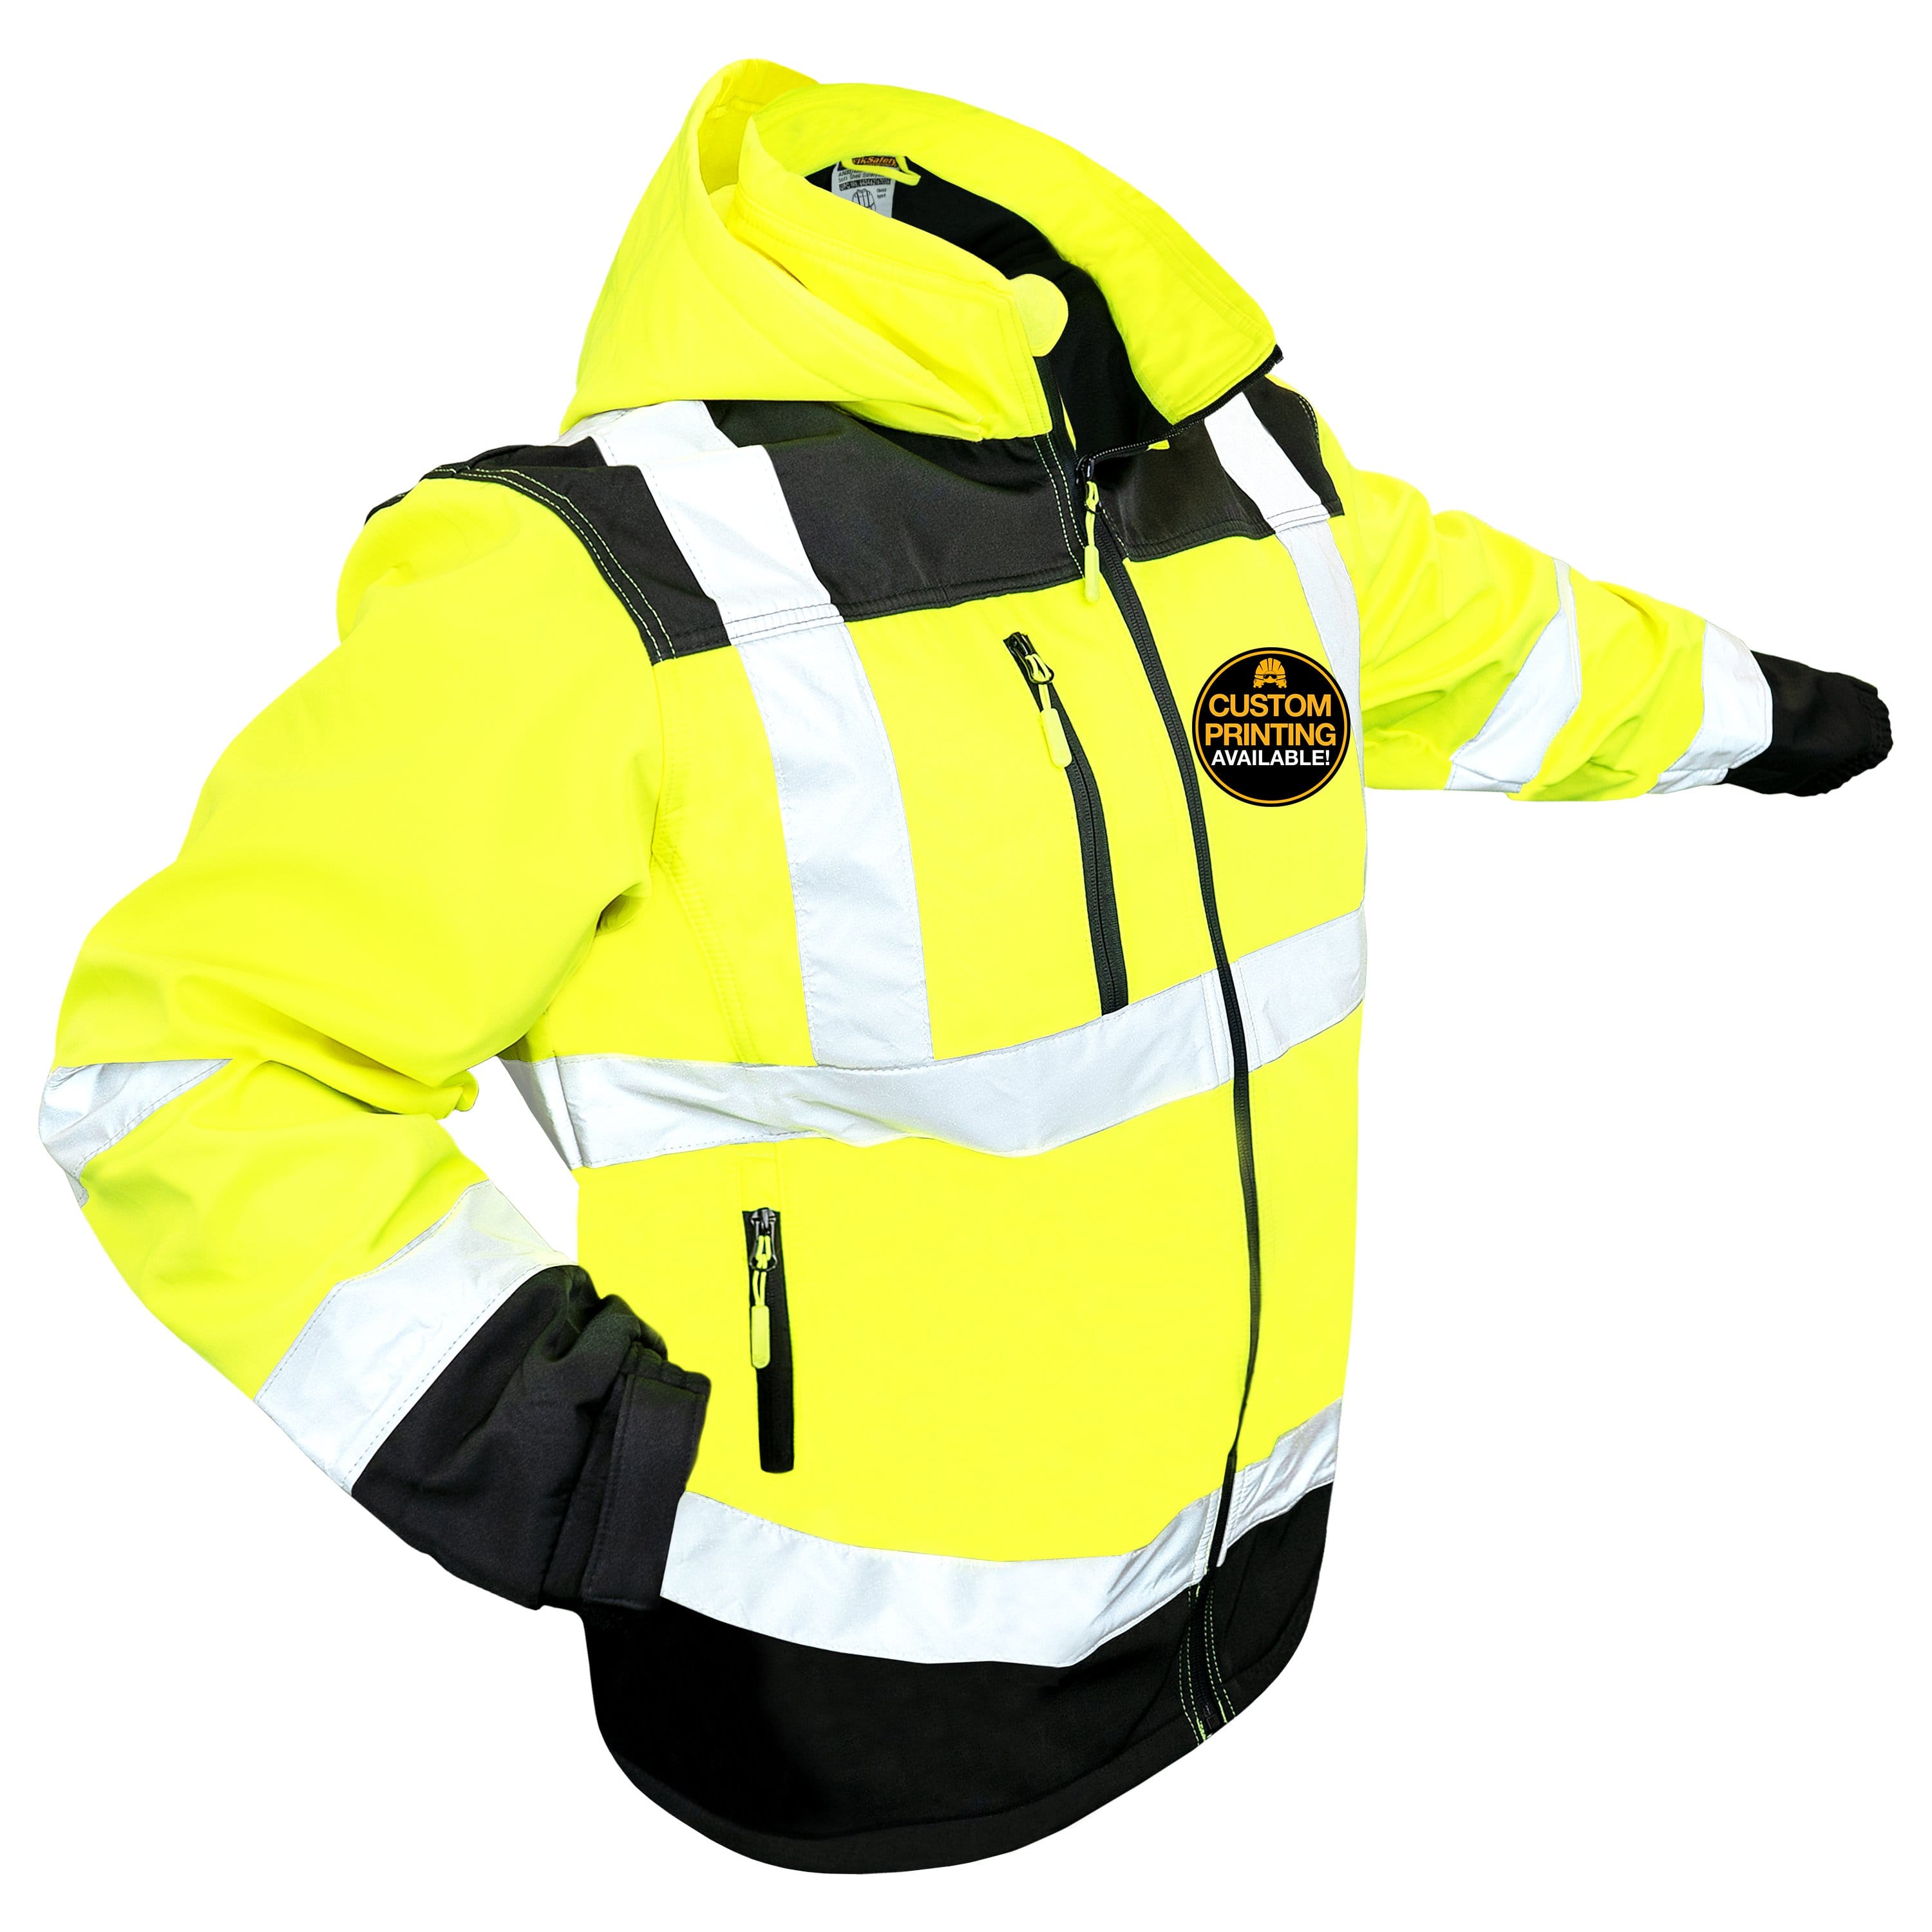 Hi-vis softshell jacket - Cleaners Uniforms, Housekeeping & Cleaning  Clothing Online Shop